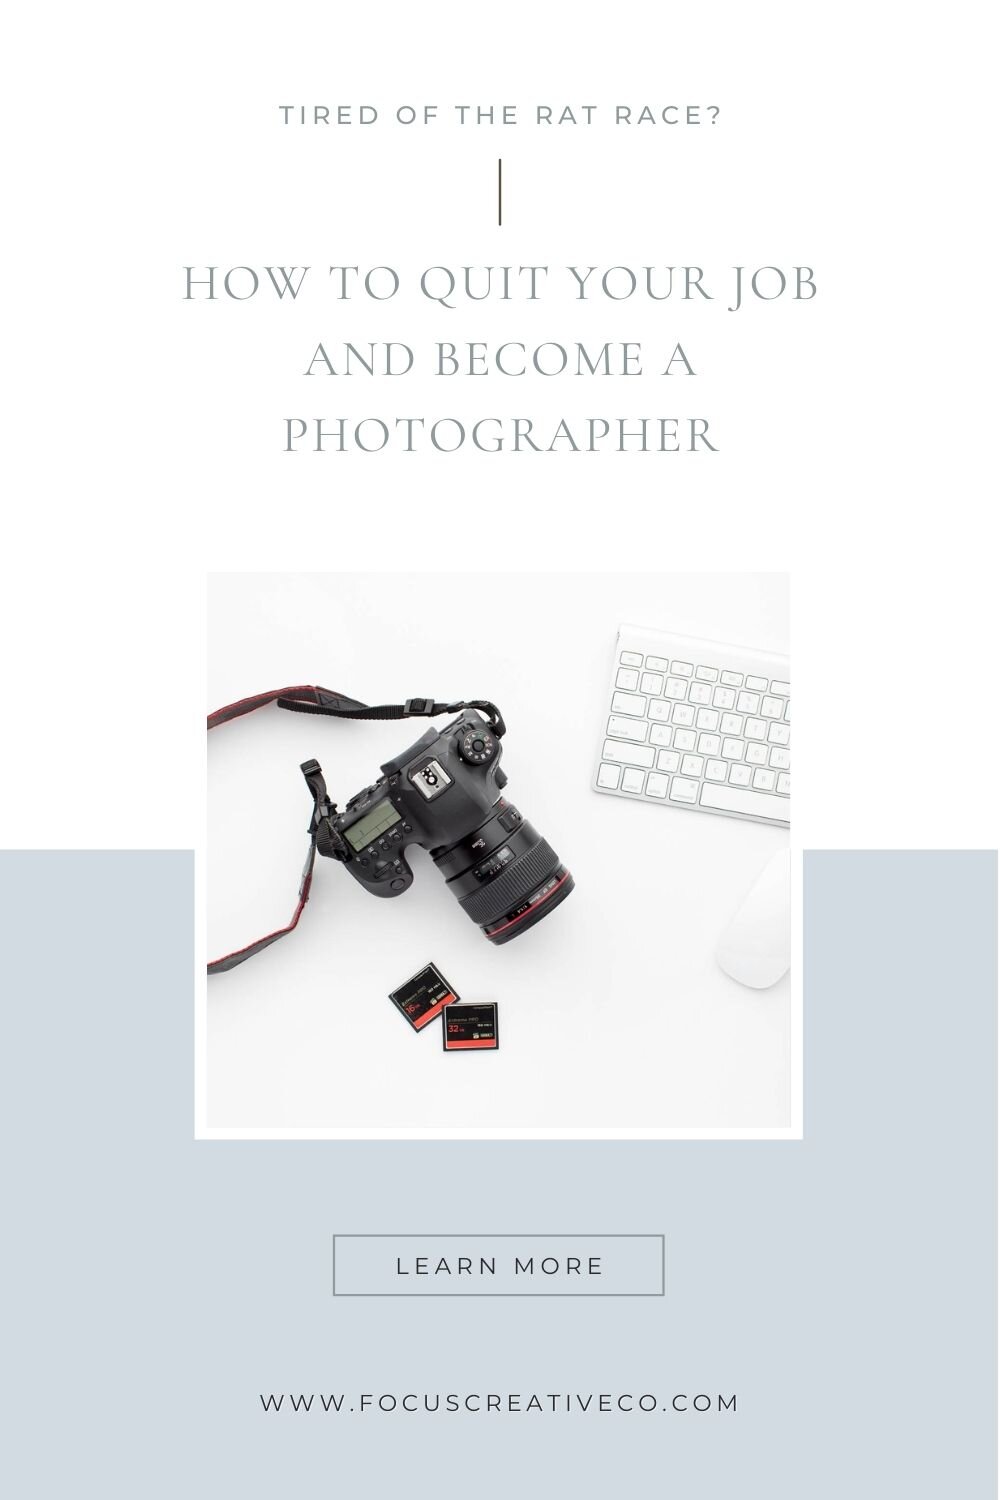 graphic for focus creative blog post about how to quit your job and become a photographer - includes photo of camera, sd cards, and keyboard on a desk